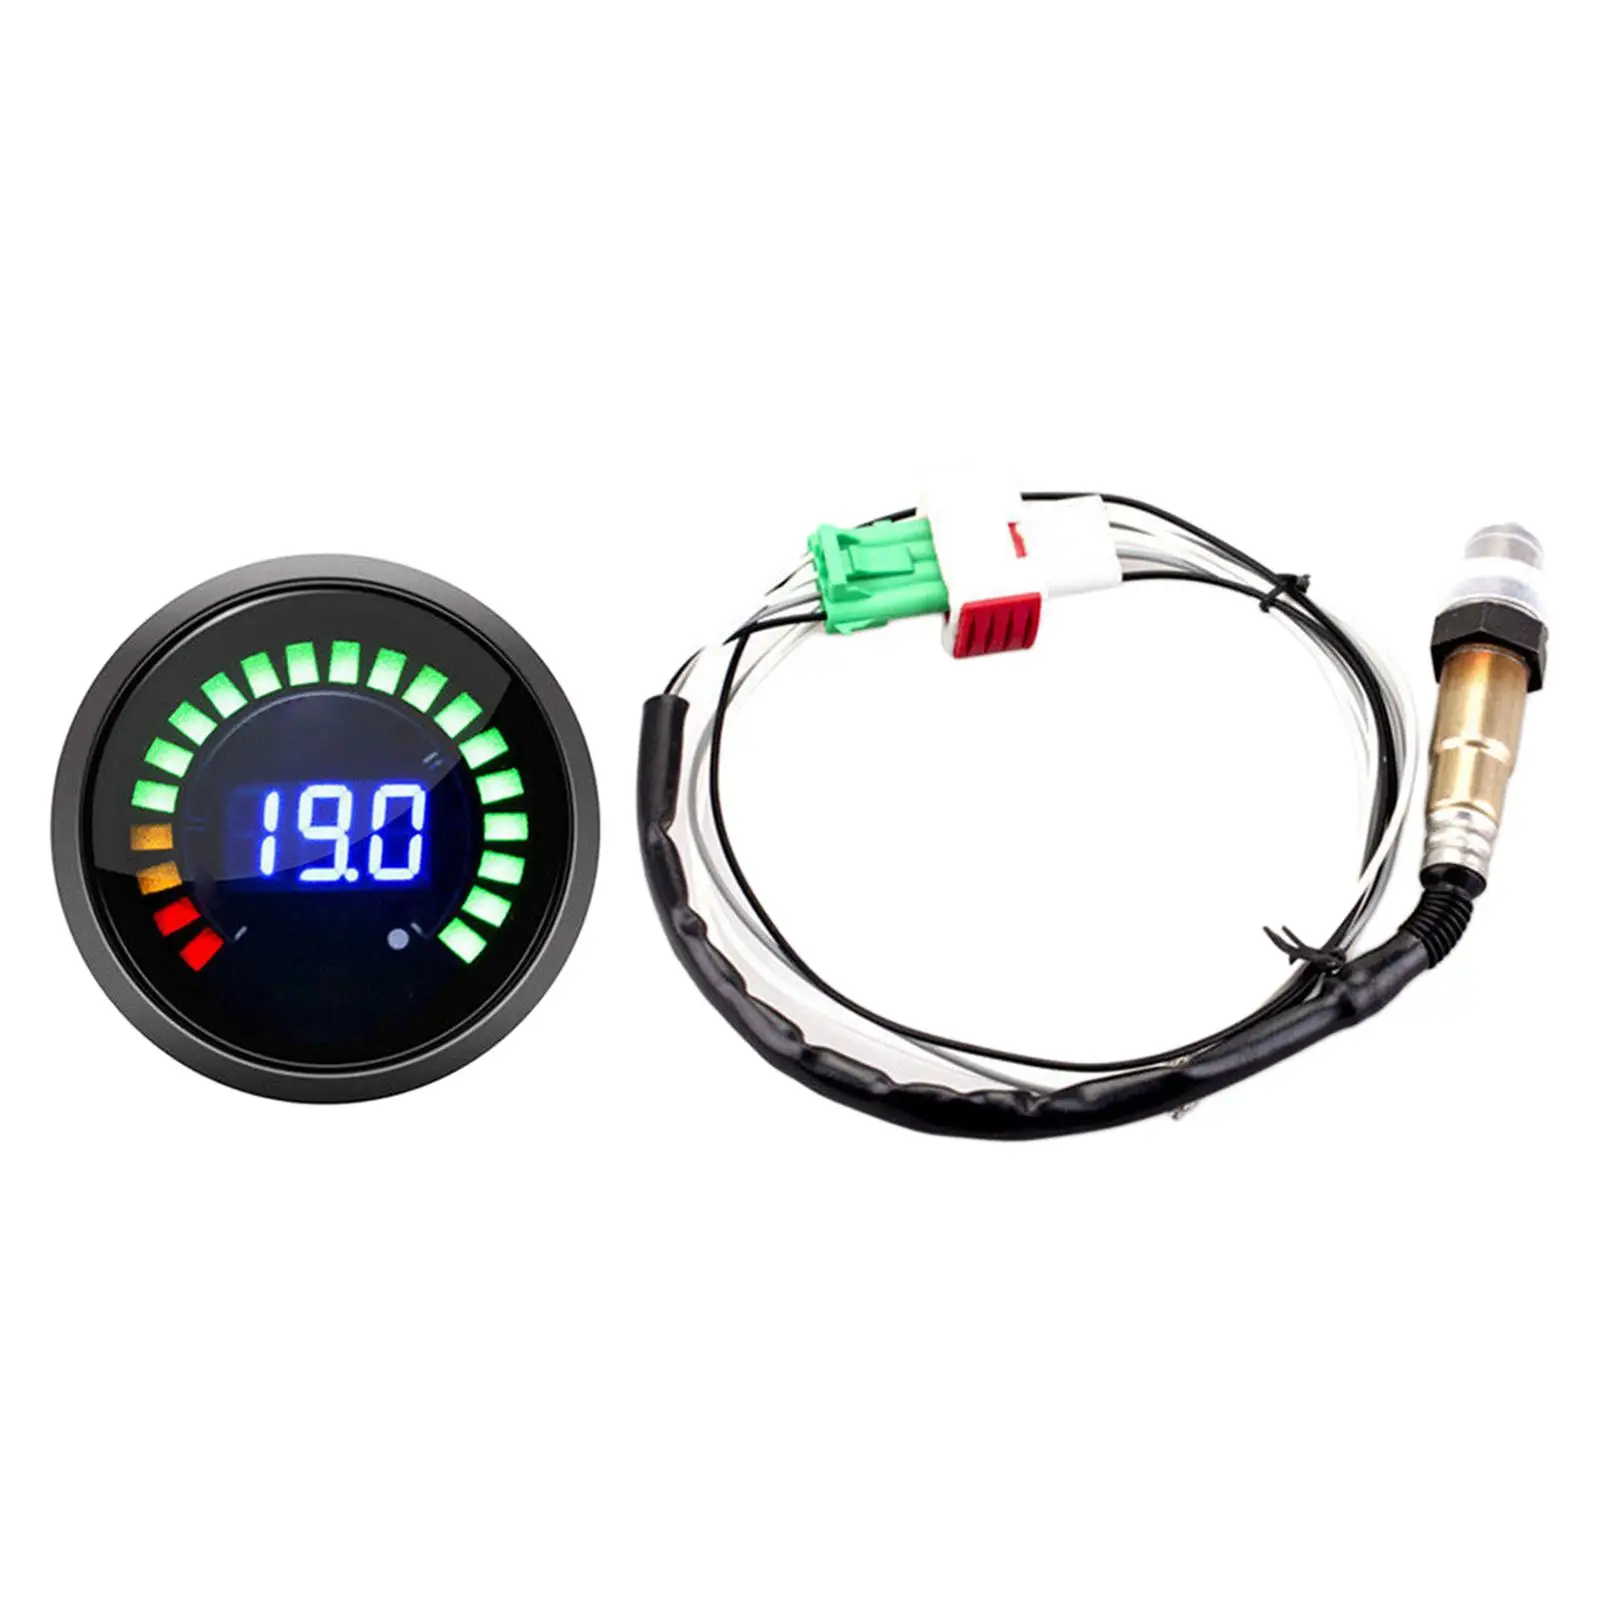 Air/Fuel Ratio Gauge with O2 Oxygen Sensor Fits for 12V Vehicle Easy to Install Replacement